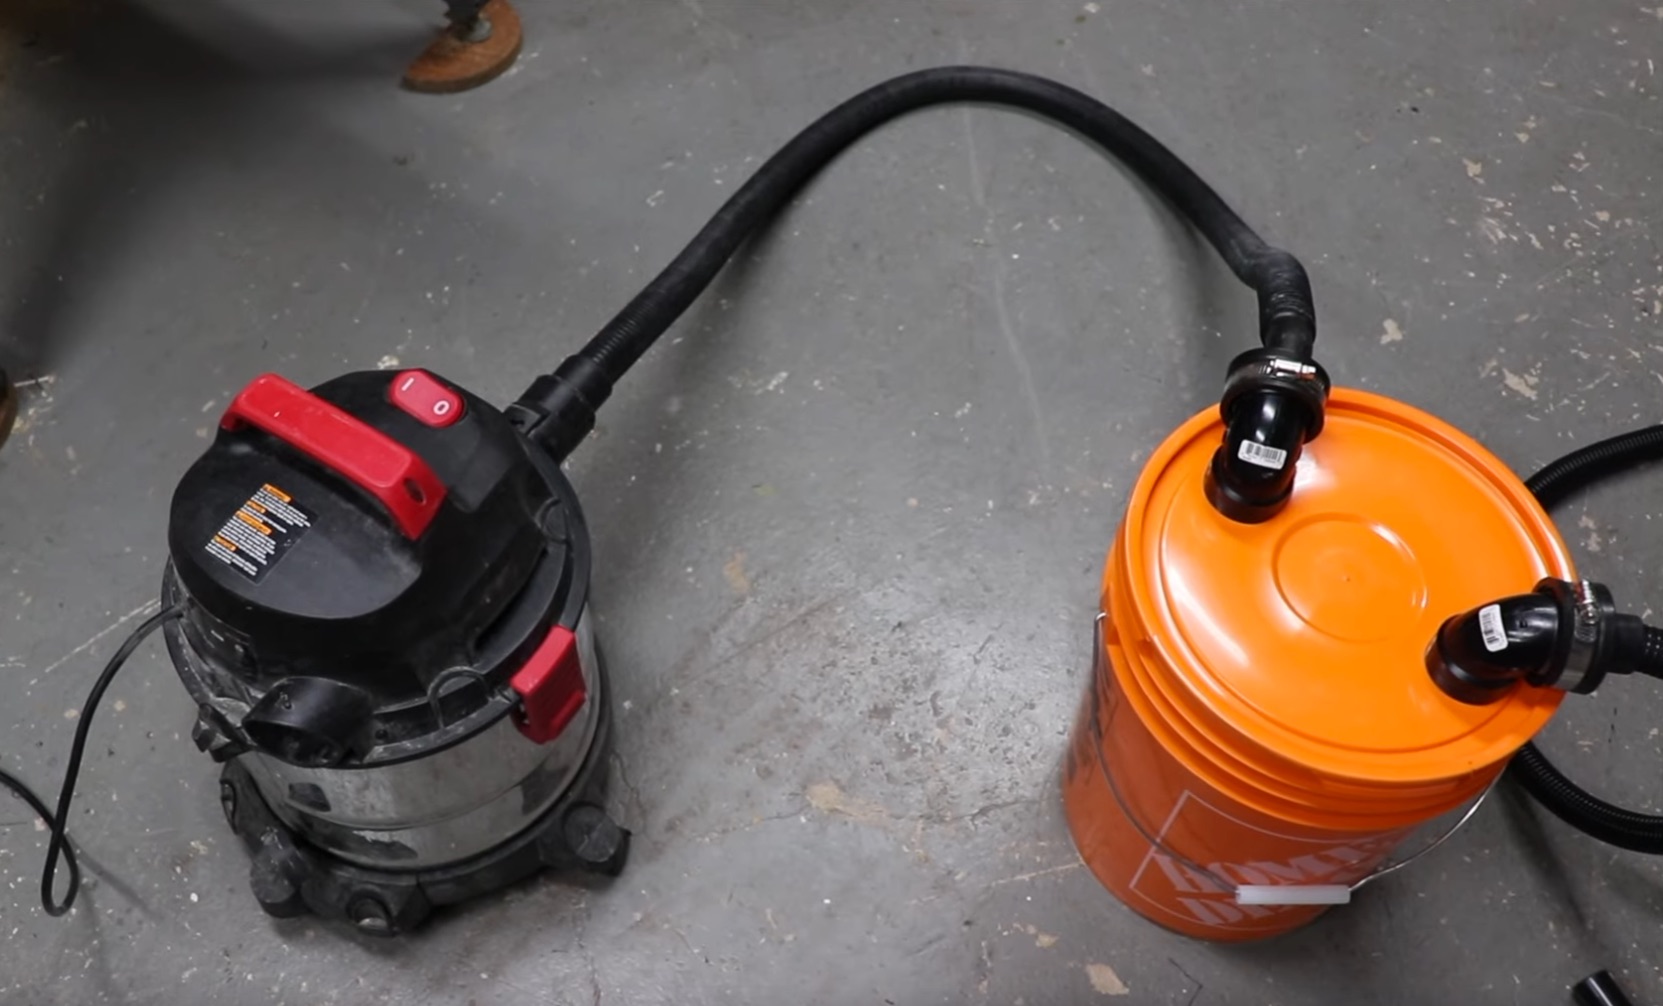 https://storables.com/wp-content/uploads/2023/09/how-to-turn-a-shop-vac-into-a-water-pump-1694516277.jpg